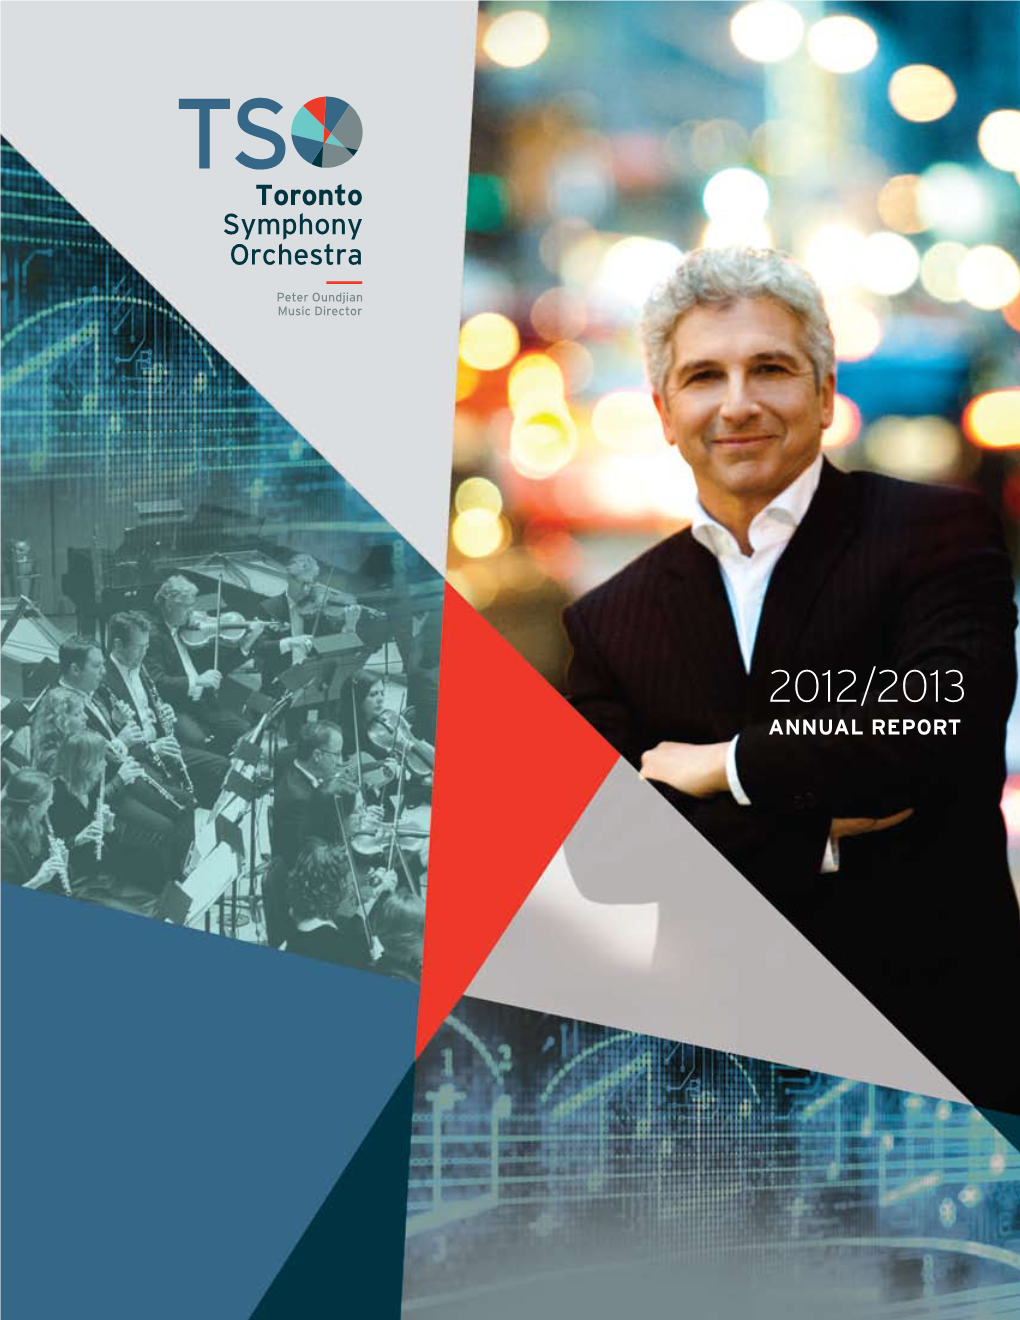 View/Download the 2012/13 Annual Report